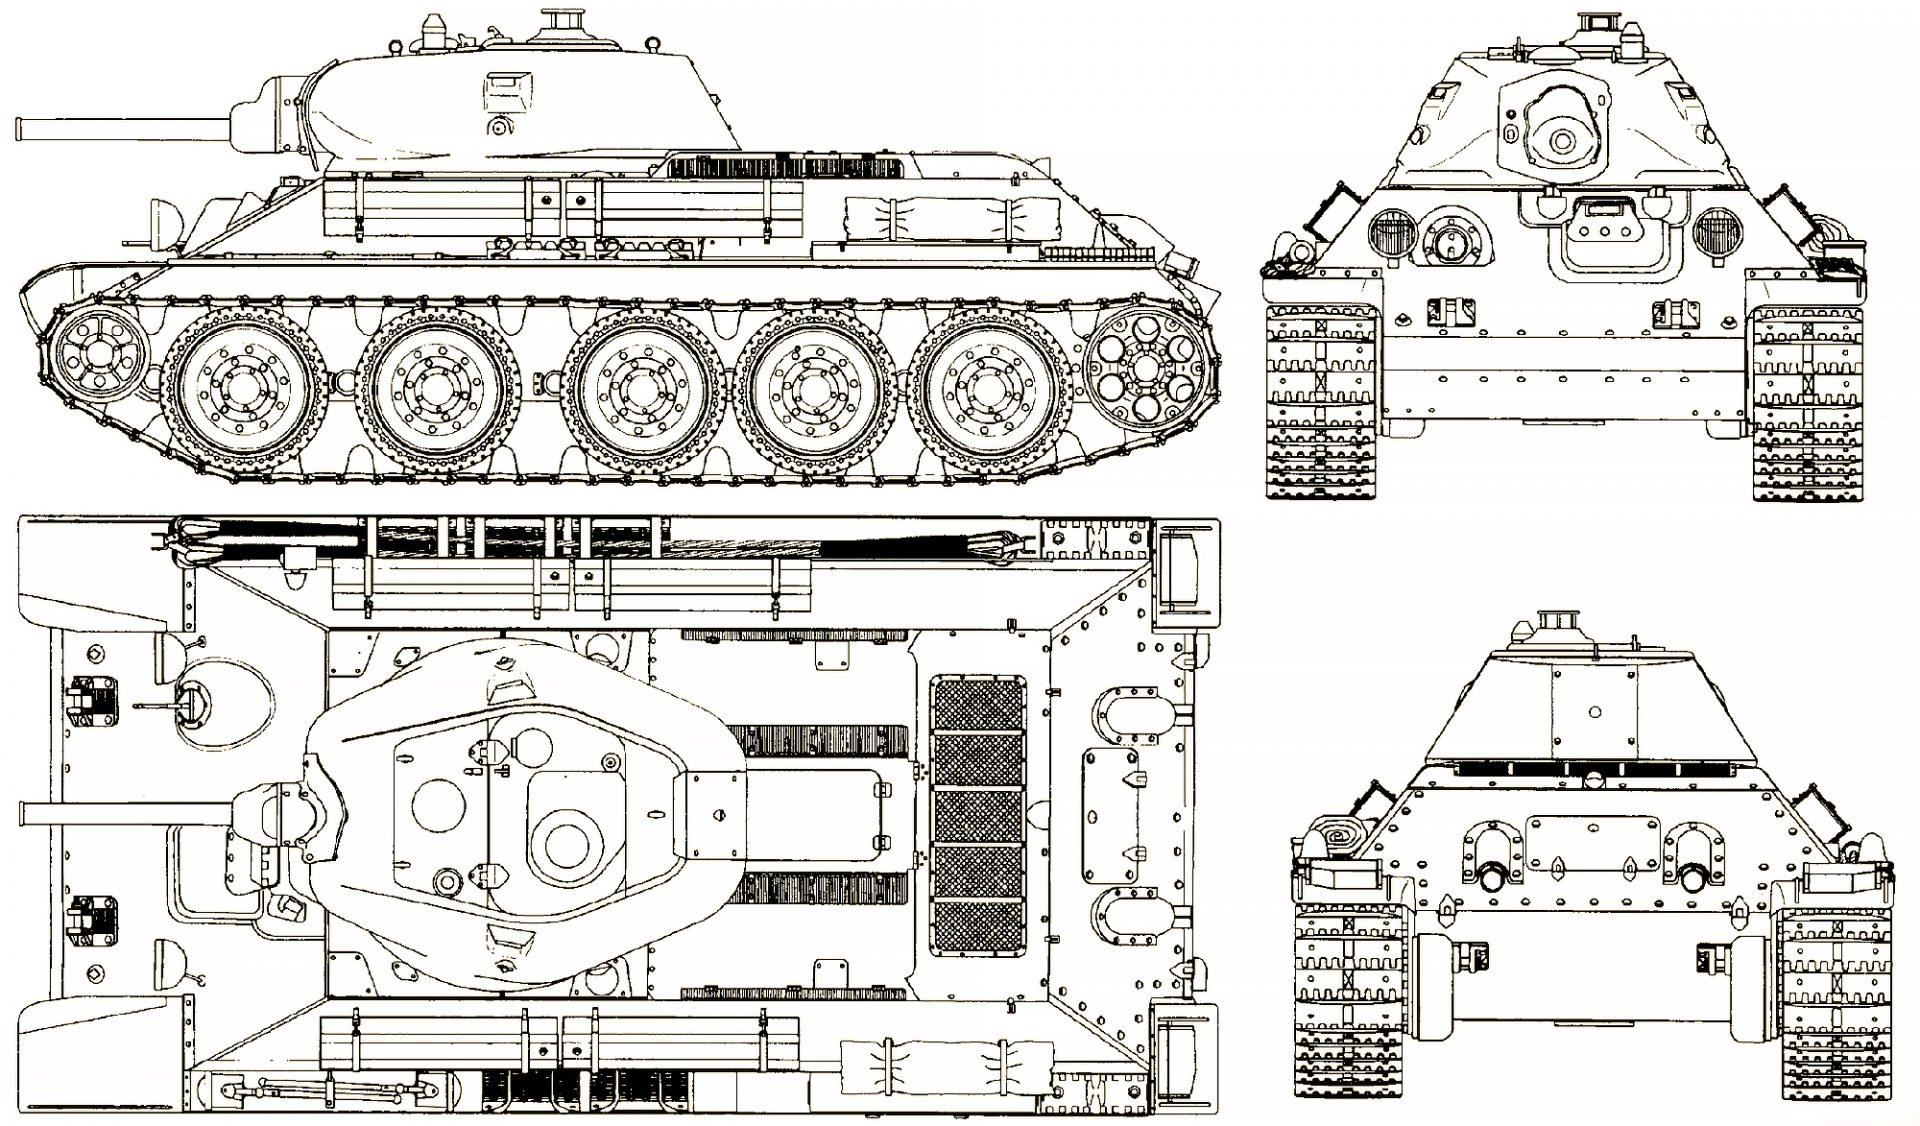 A black and white technical blueprint drawing of a T-34 tank from multiple angles showing its turret, gun barrel, tracks, body, hatches, ports, exhaust pipe, antenna, and machine gun.